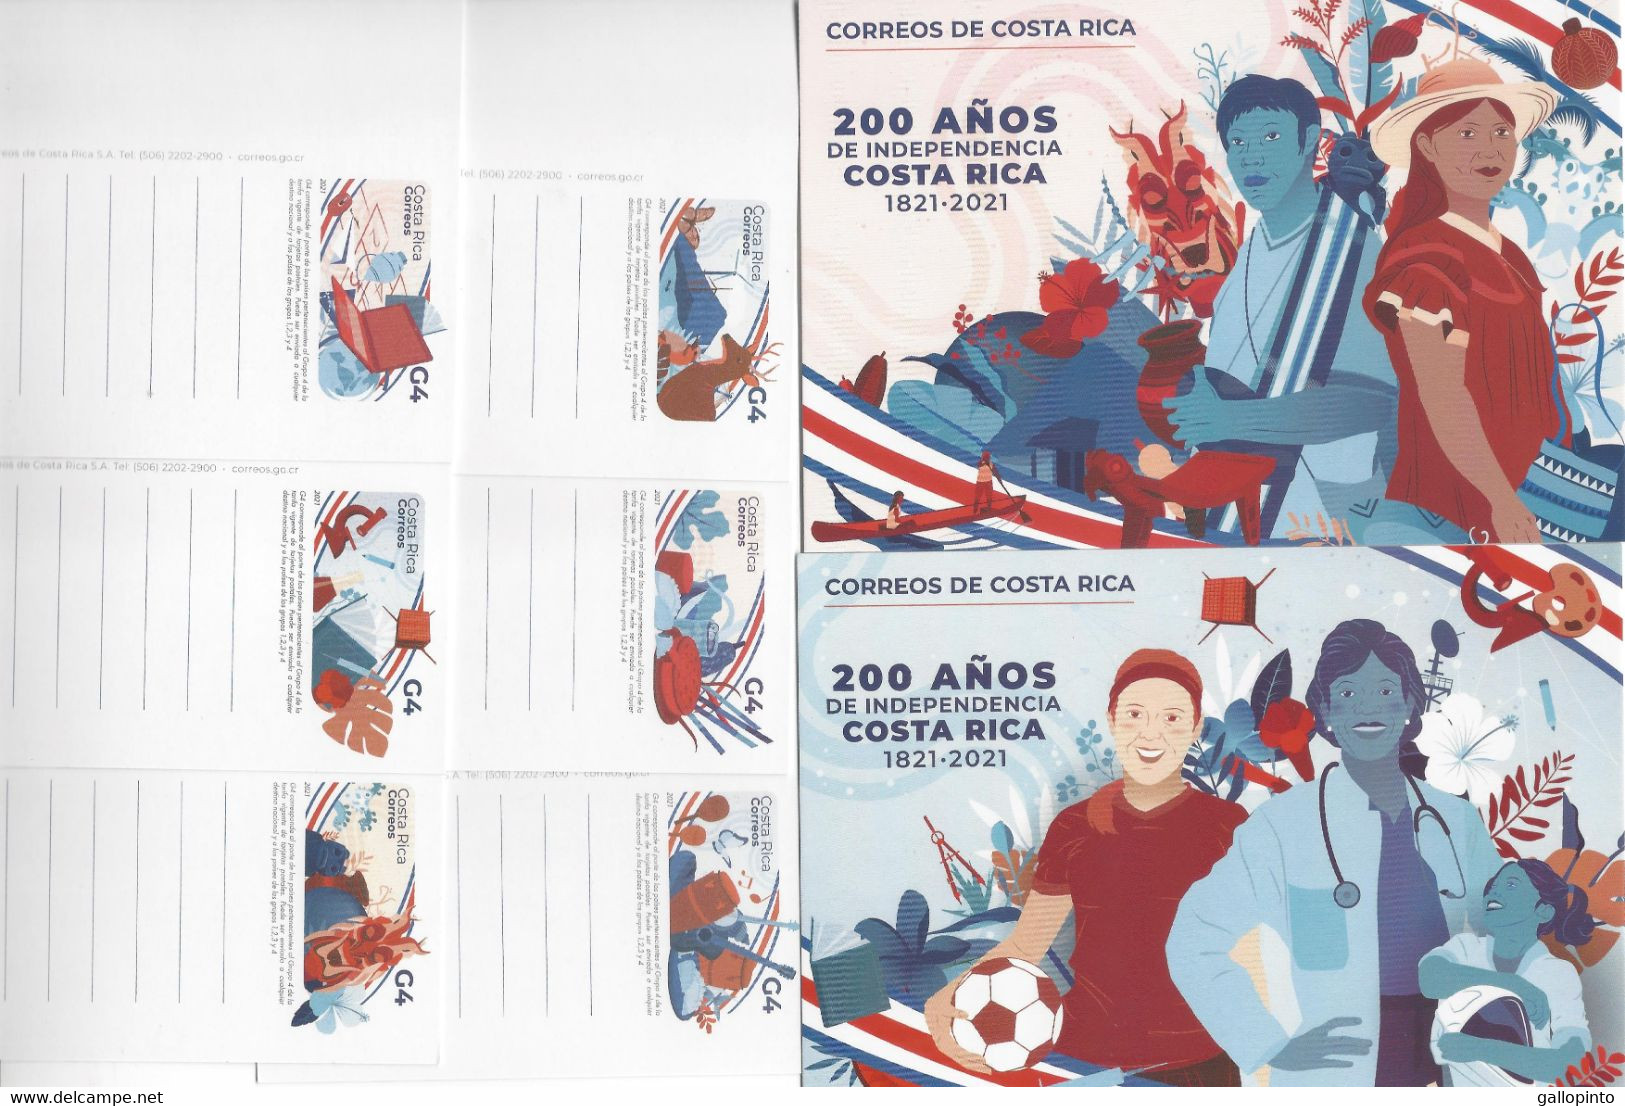 COSTA RICA 6 POSTCARDS PREPAID G4, 200 AÑOS DE INDEPENDENCIA, 200 YEARS Of INDEPENDENCE, 2021 - Costa Rica